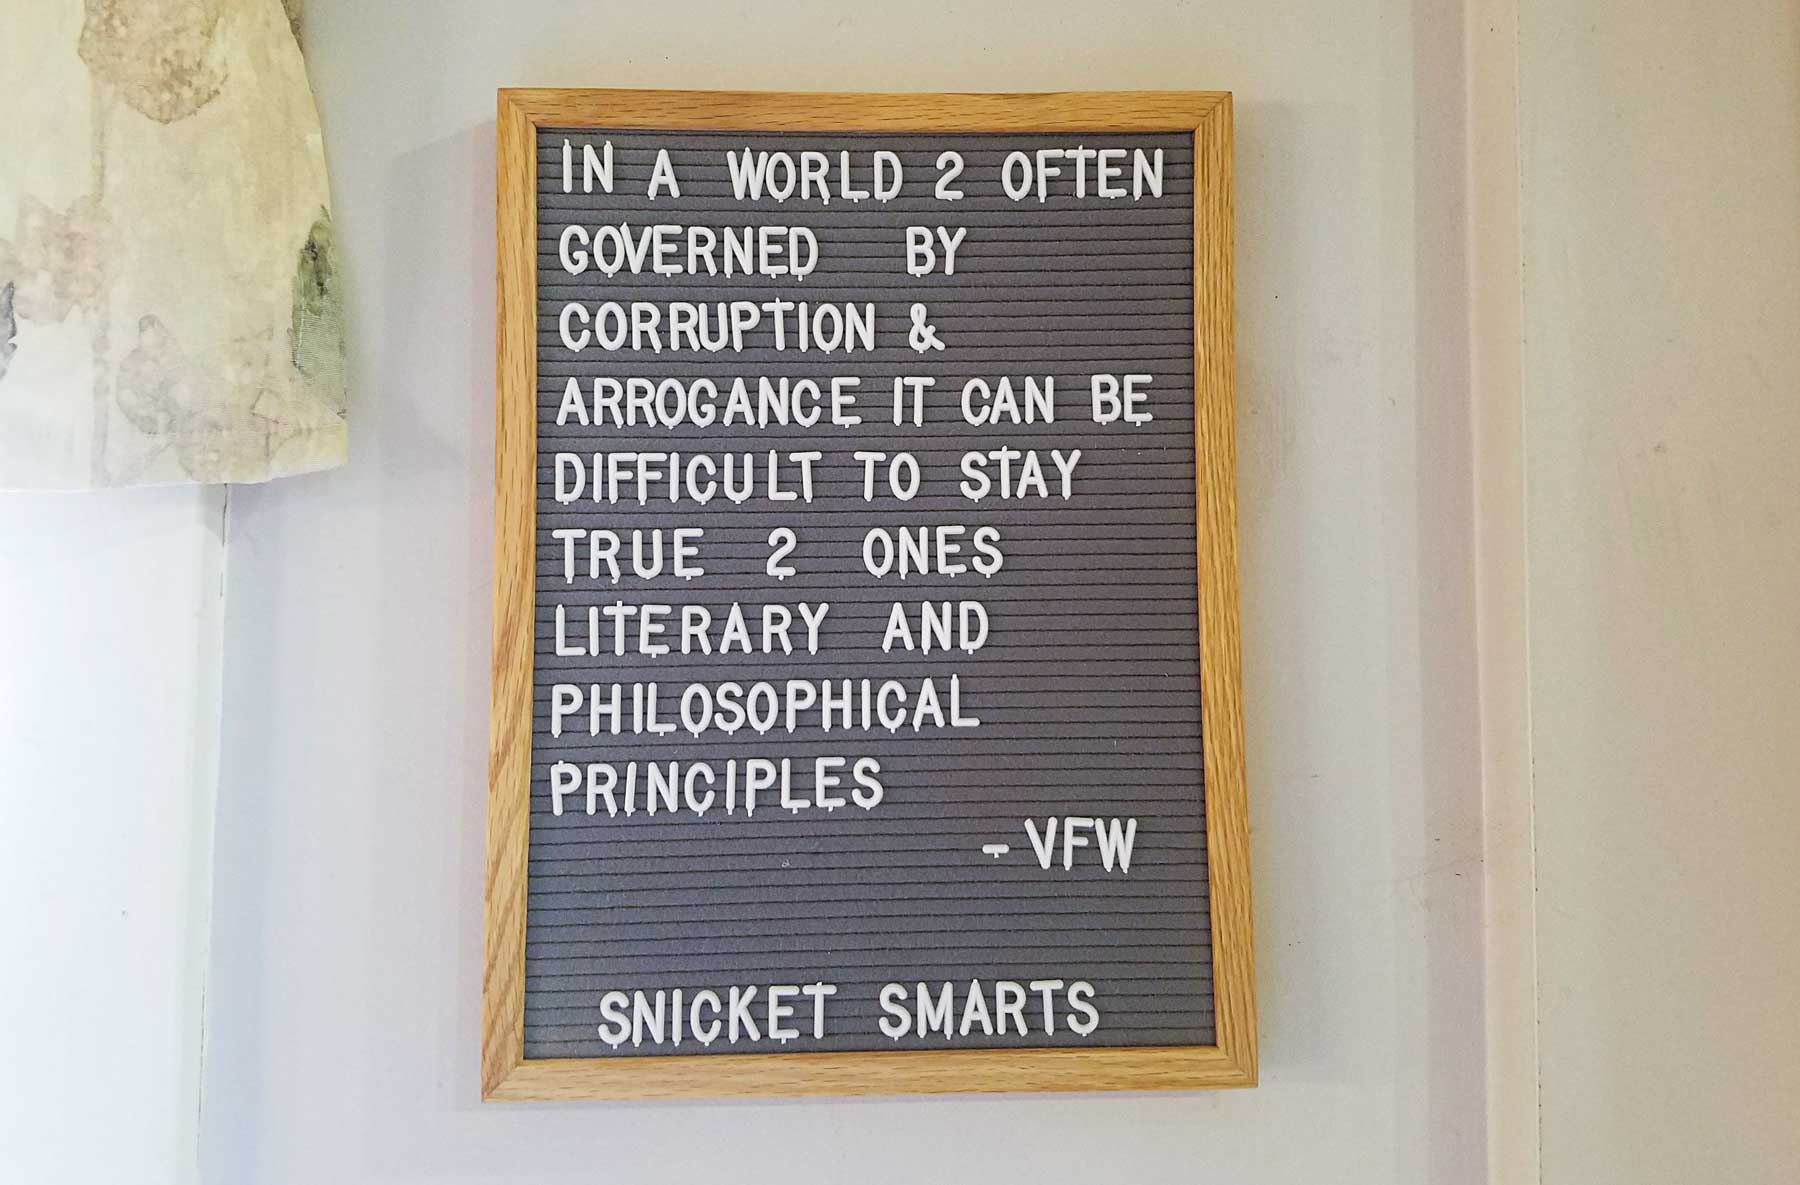 snicket smarts quote